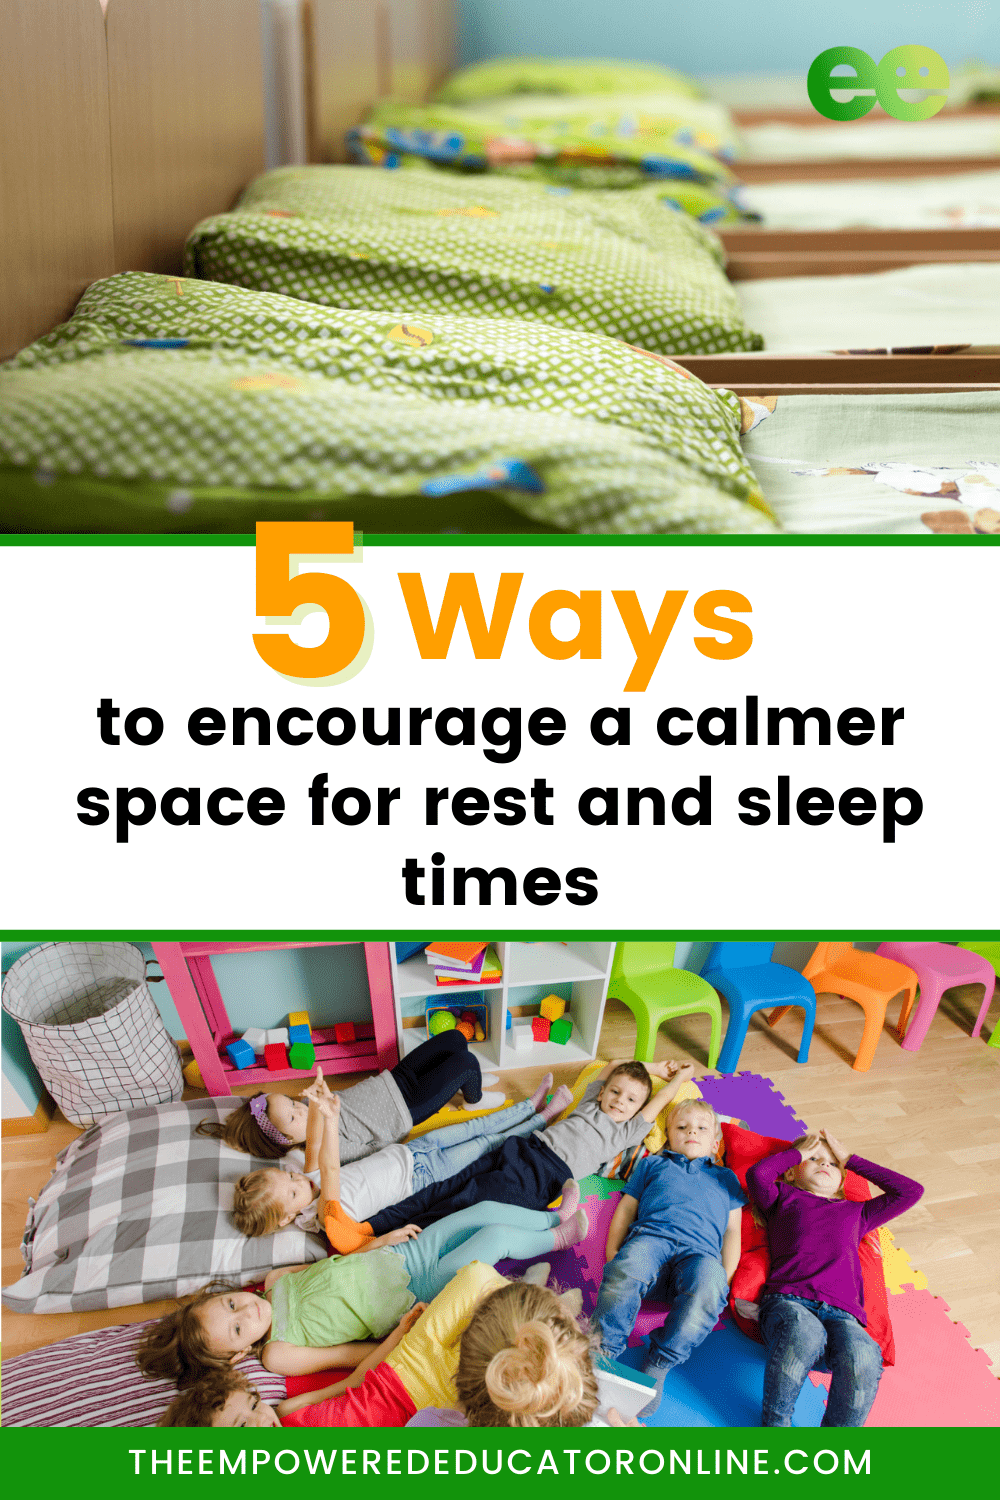 Make your childcare sleep and rest routines less stressful